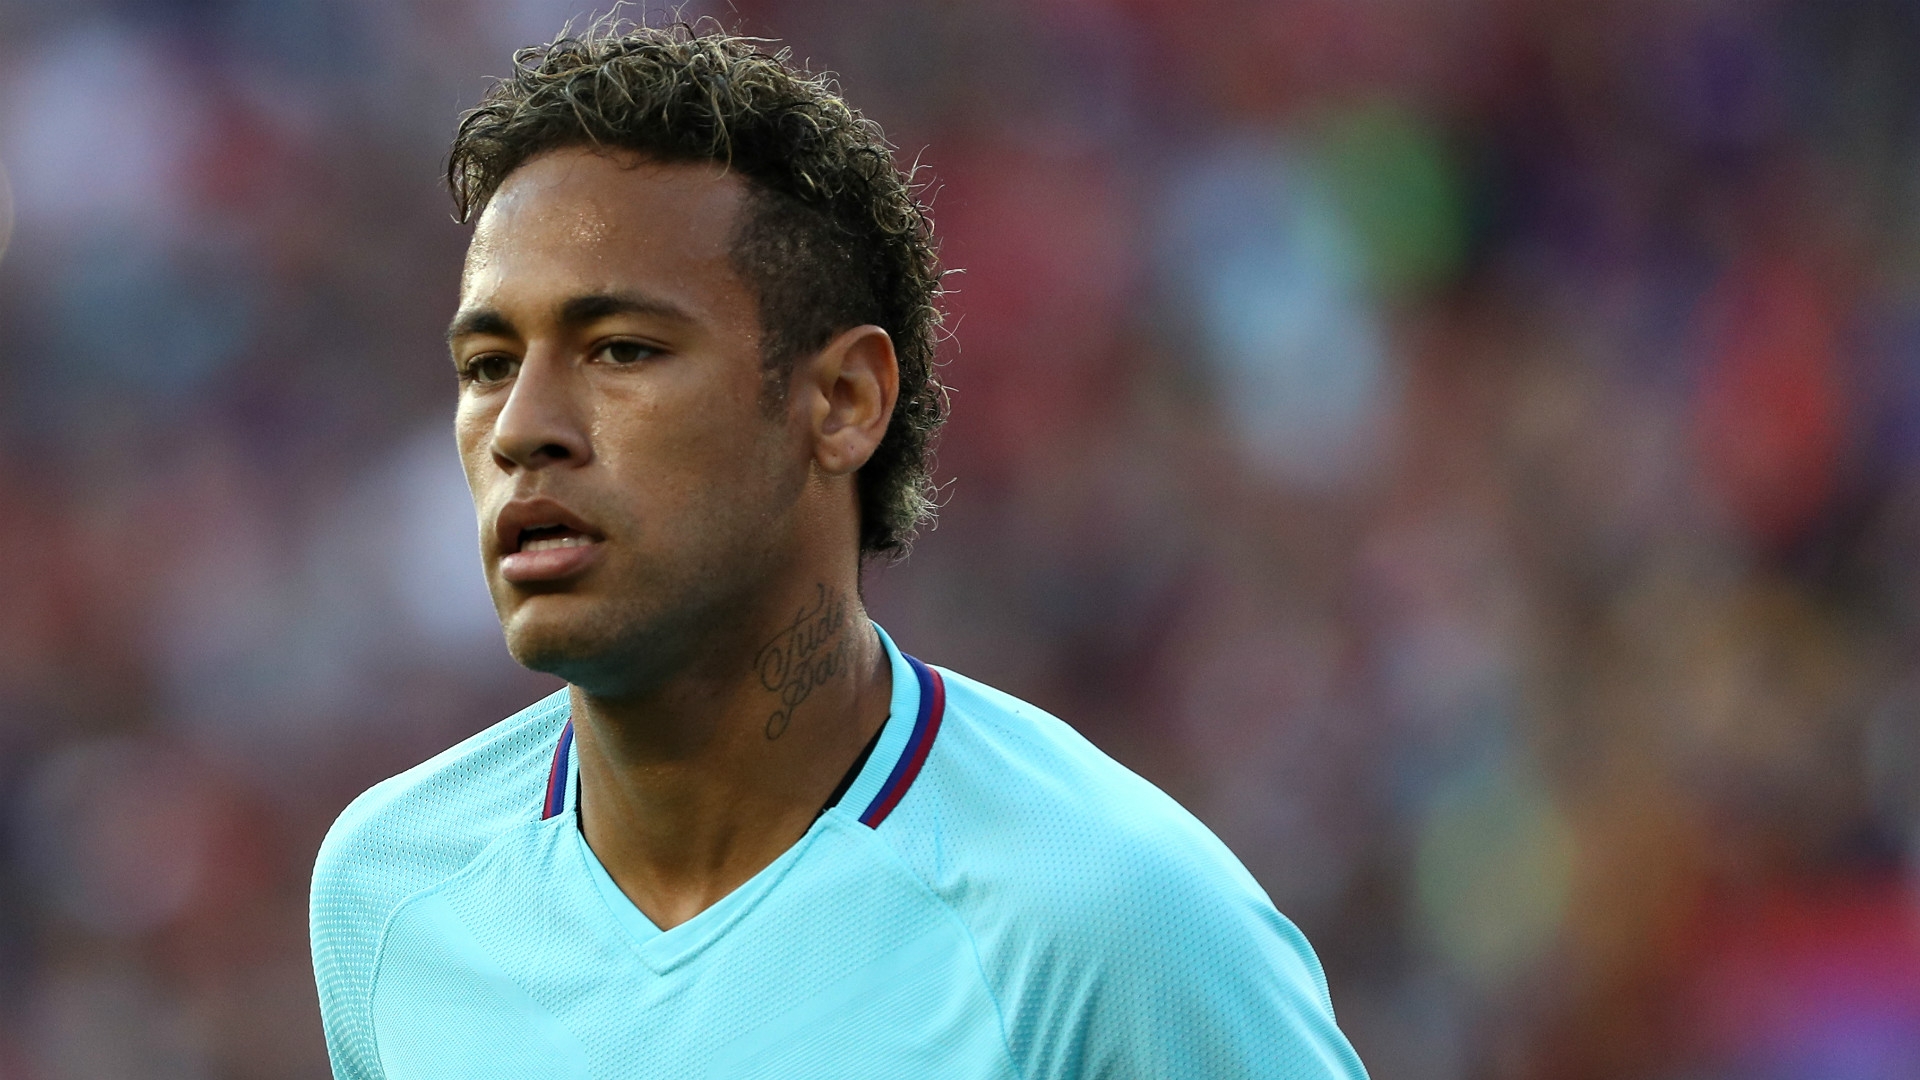 Neymar is reported to have stormed out of a Barcelona training session following an altercation with teammate Semedo. Is a transfr to PSG imminent?